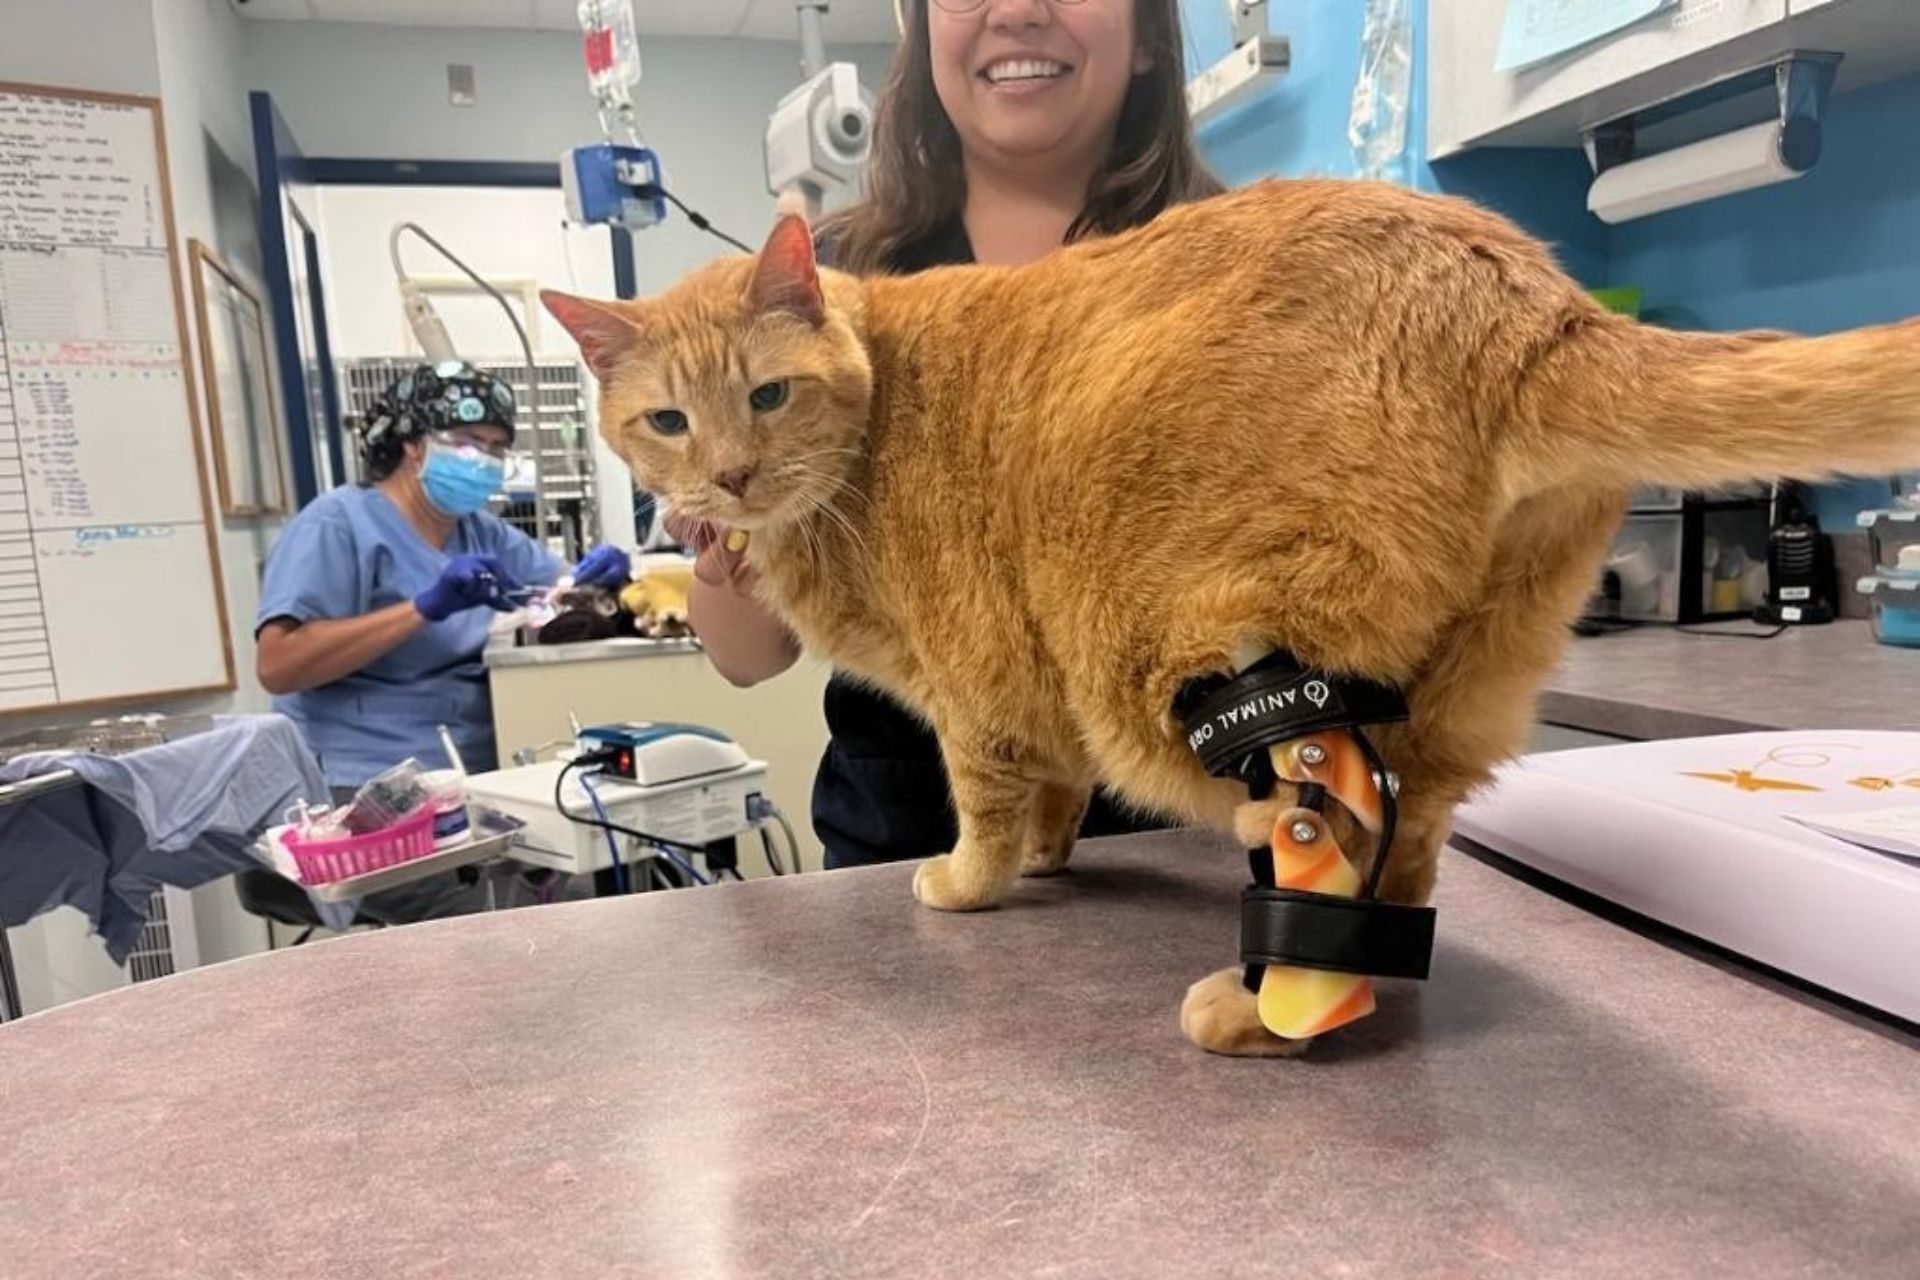 An orange cat stands on a table with a black leg brace